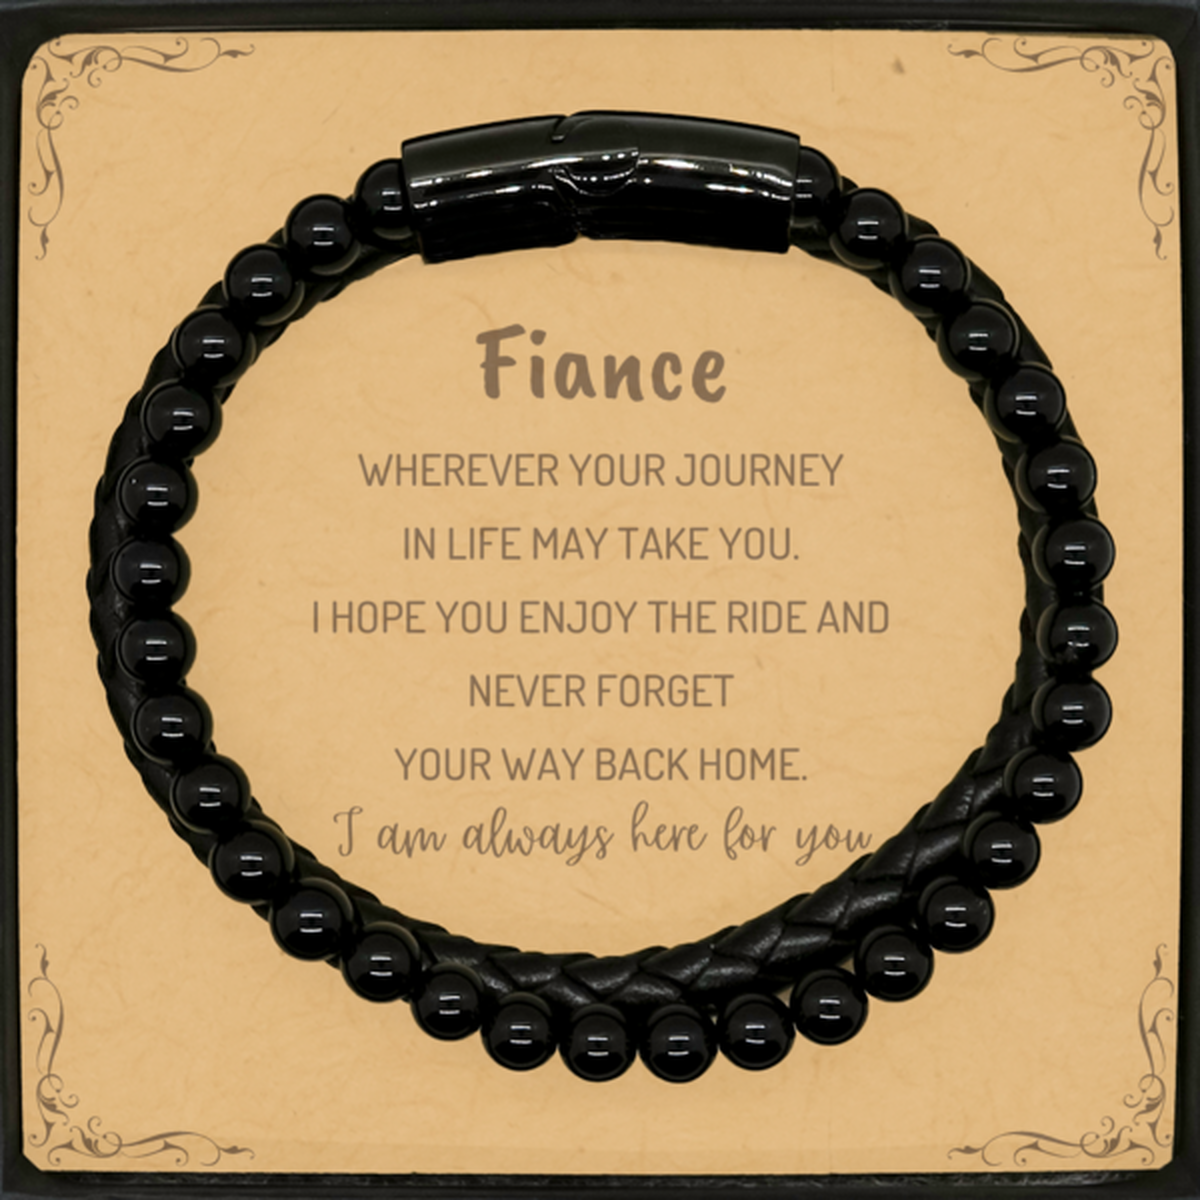 Fiance wherever your journey in life may take you, I am always here for you Fiance Stone Leather Bracelets, Awesome Christmas Gifts For Fiance Message Card, Fiance Birthday Gifts for Men Women Family Loved One